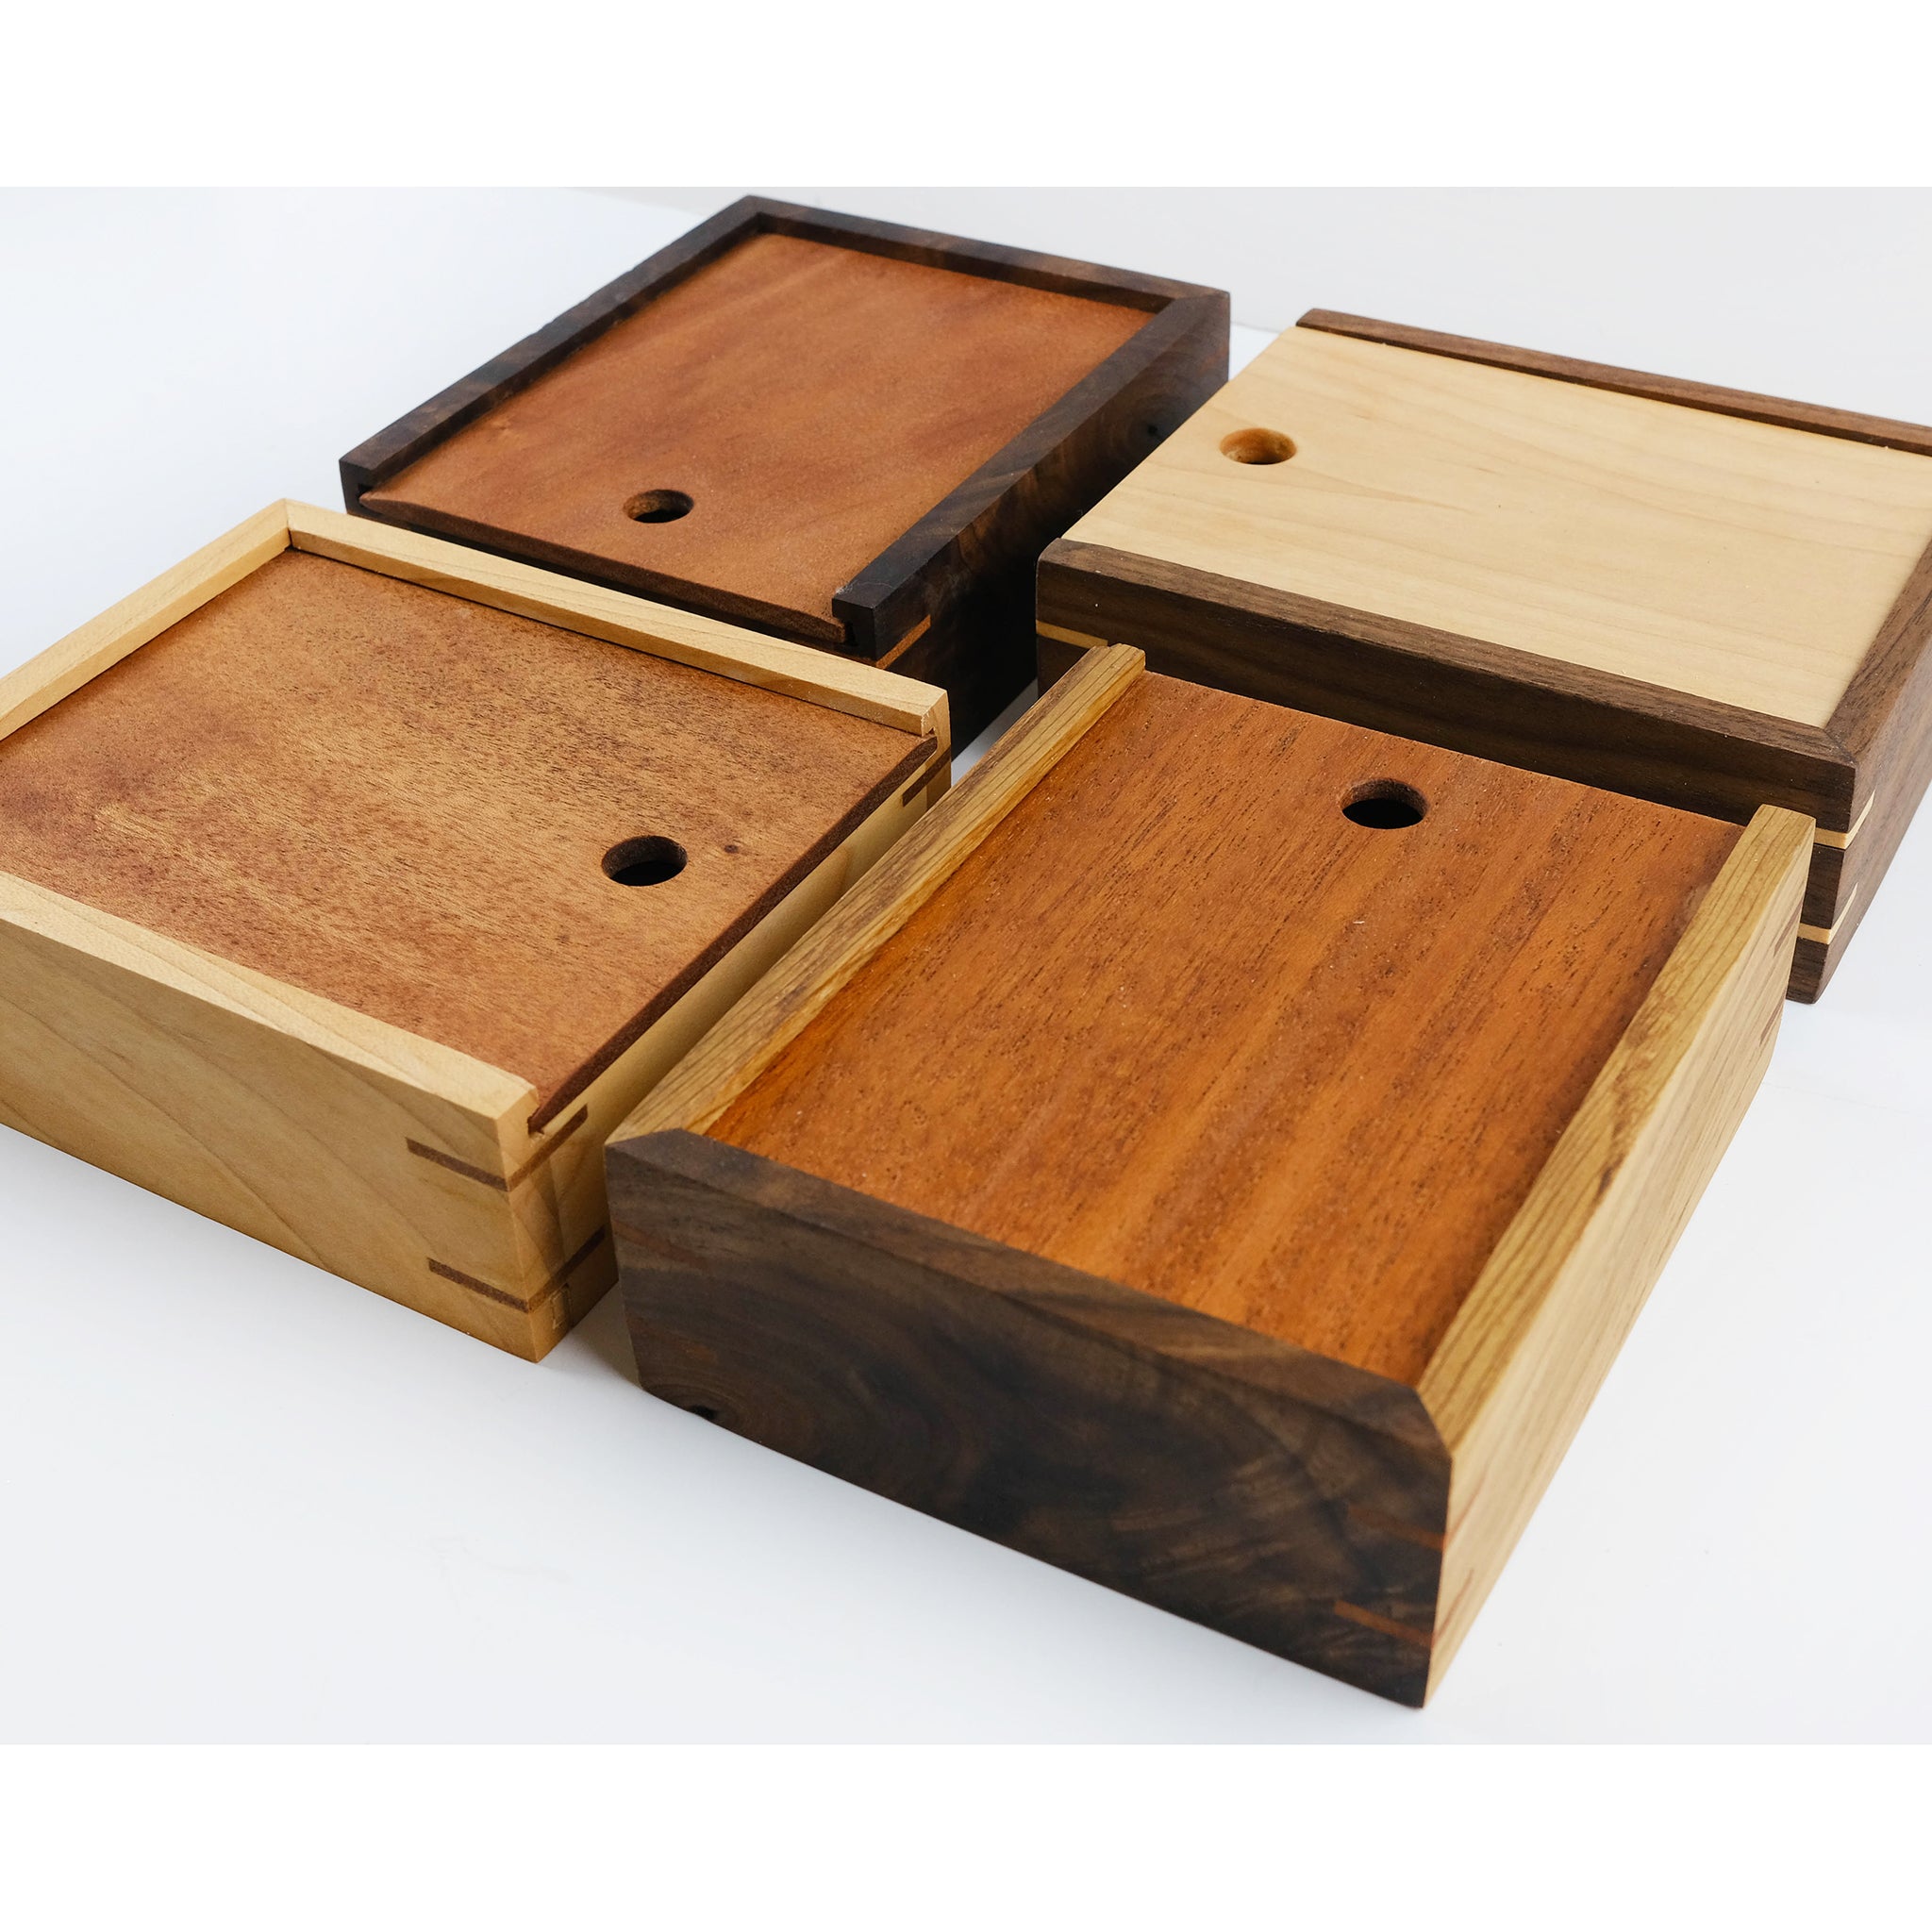 Special Handcrafted Sewing Box